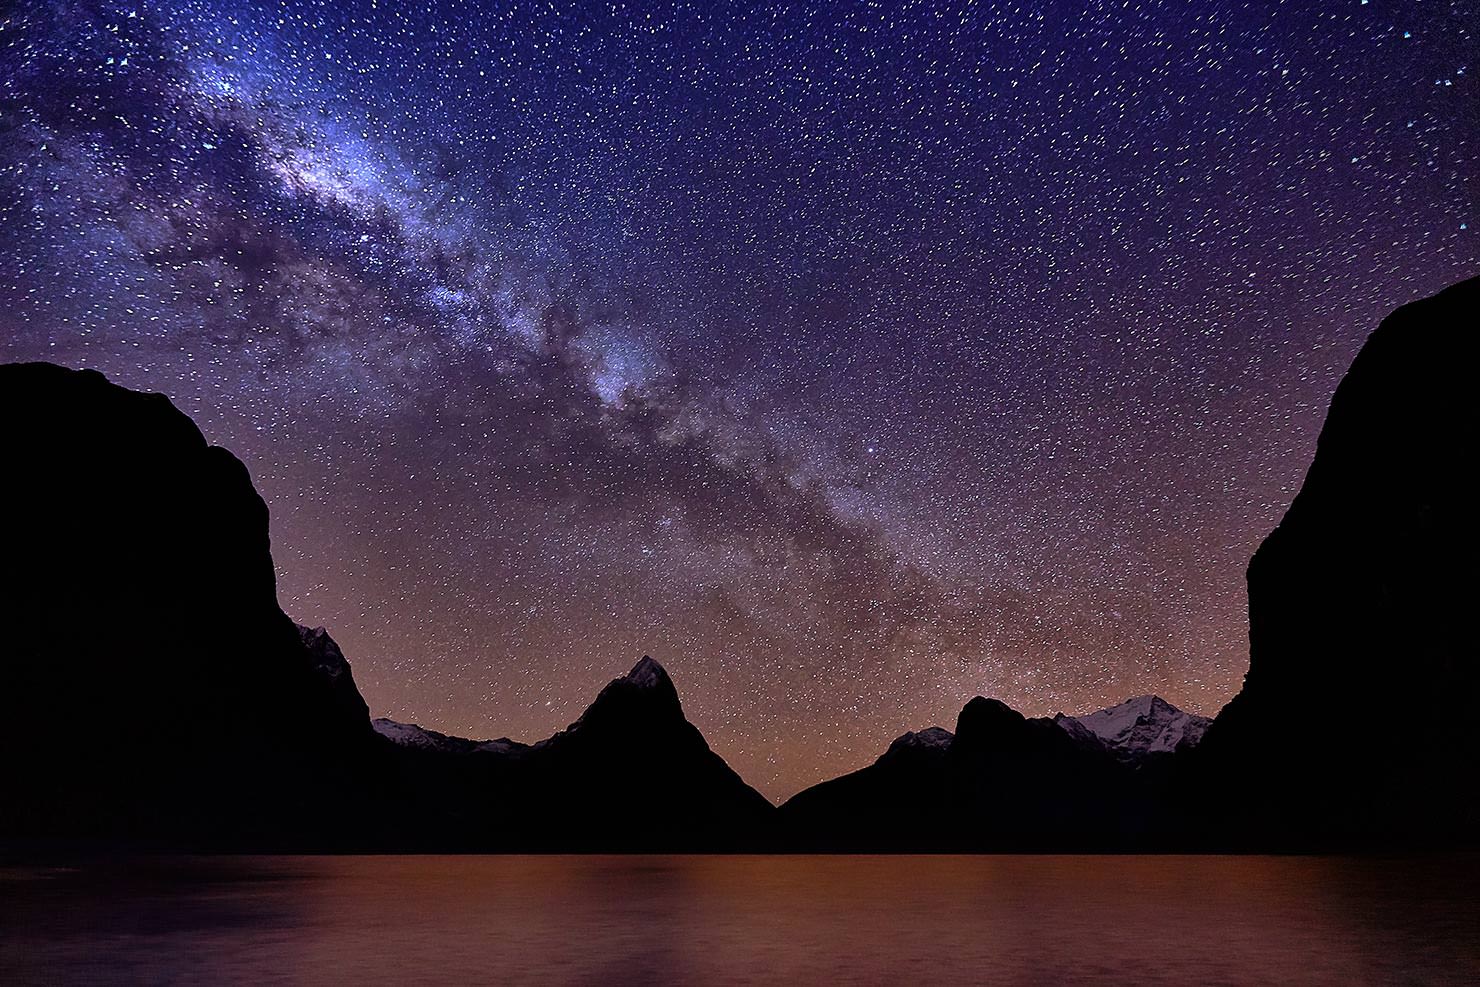 Milford Sound Long Exposure Night Sky Photography New Zealand Milky Way Star Shooting Paul Reiffer Professional Landscape Photographer